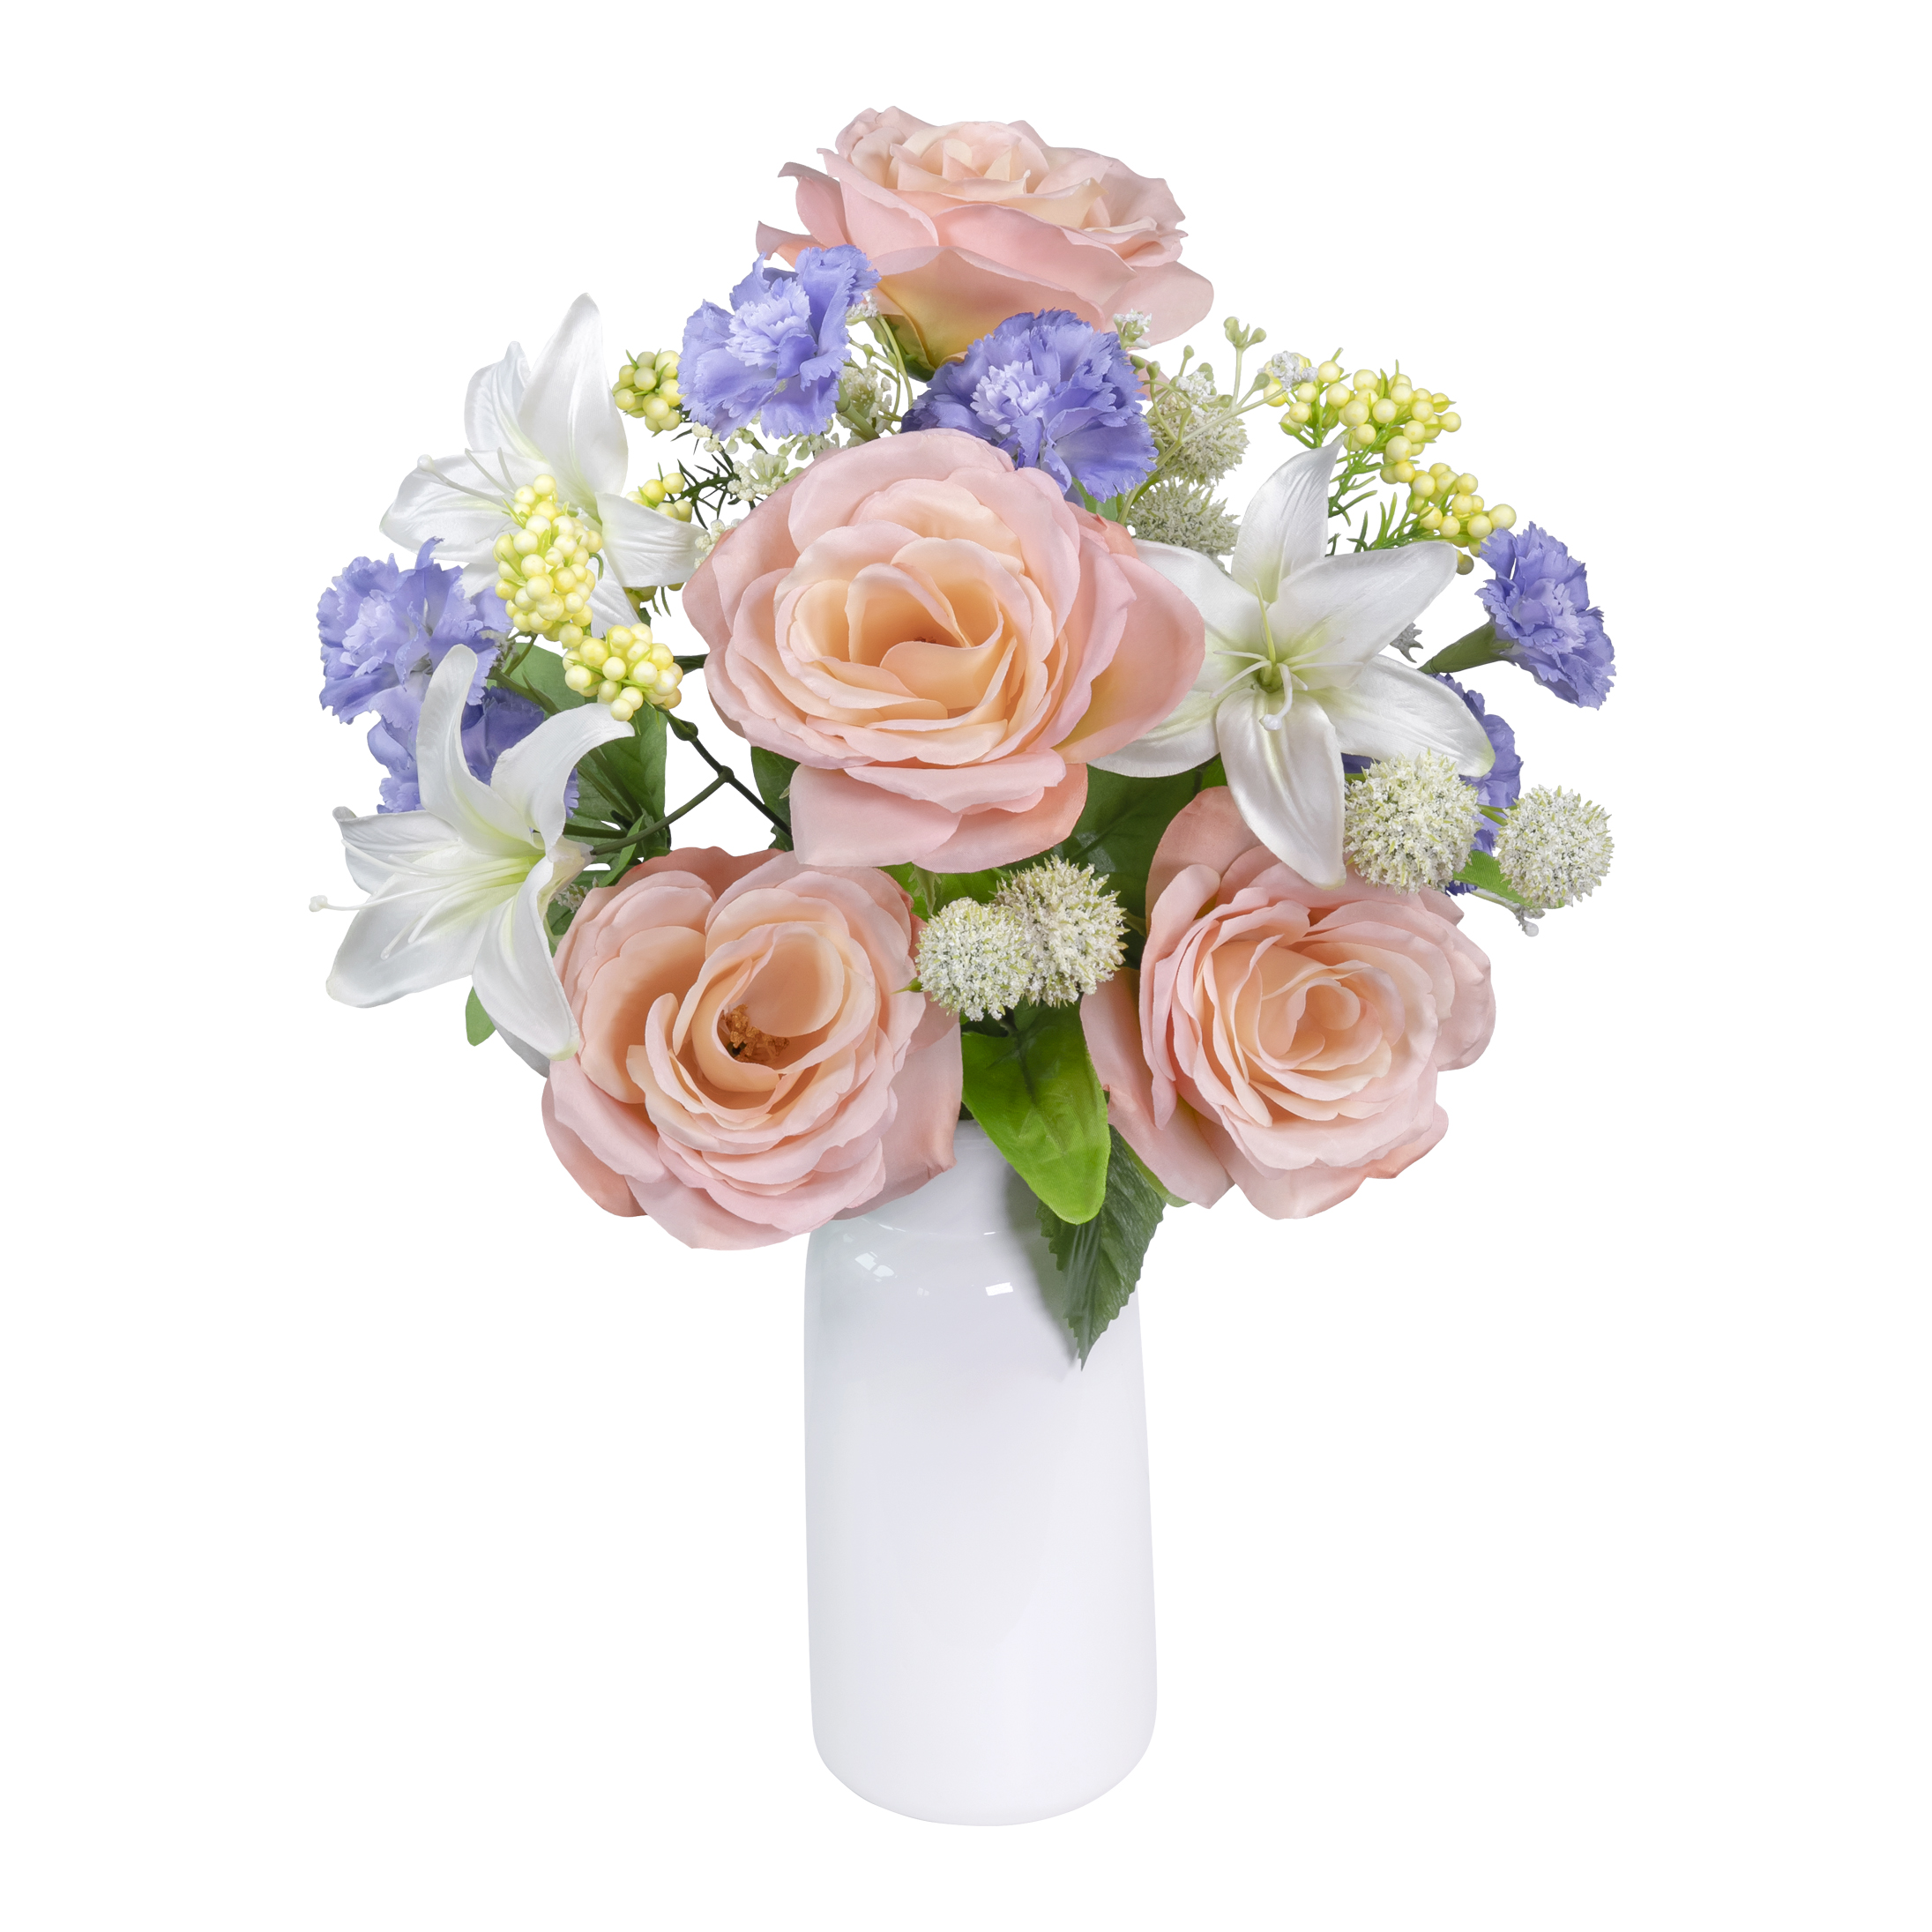 21.5-inch Artificial Silk Coral & Cream Rose & Lily Mixed Spring Bouquet, for Indoor Use, by Mainstays - image 2 of 5